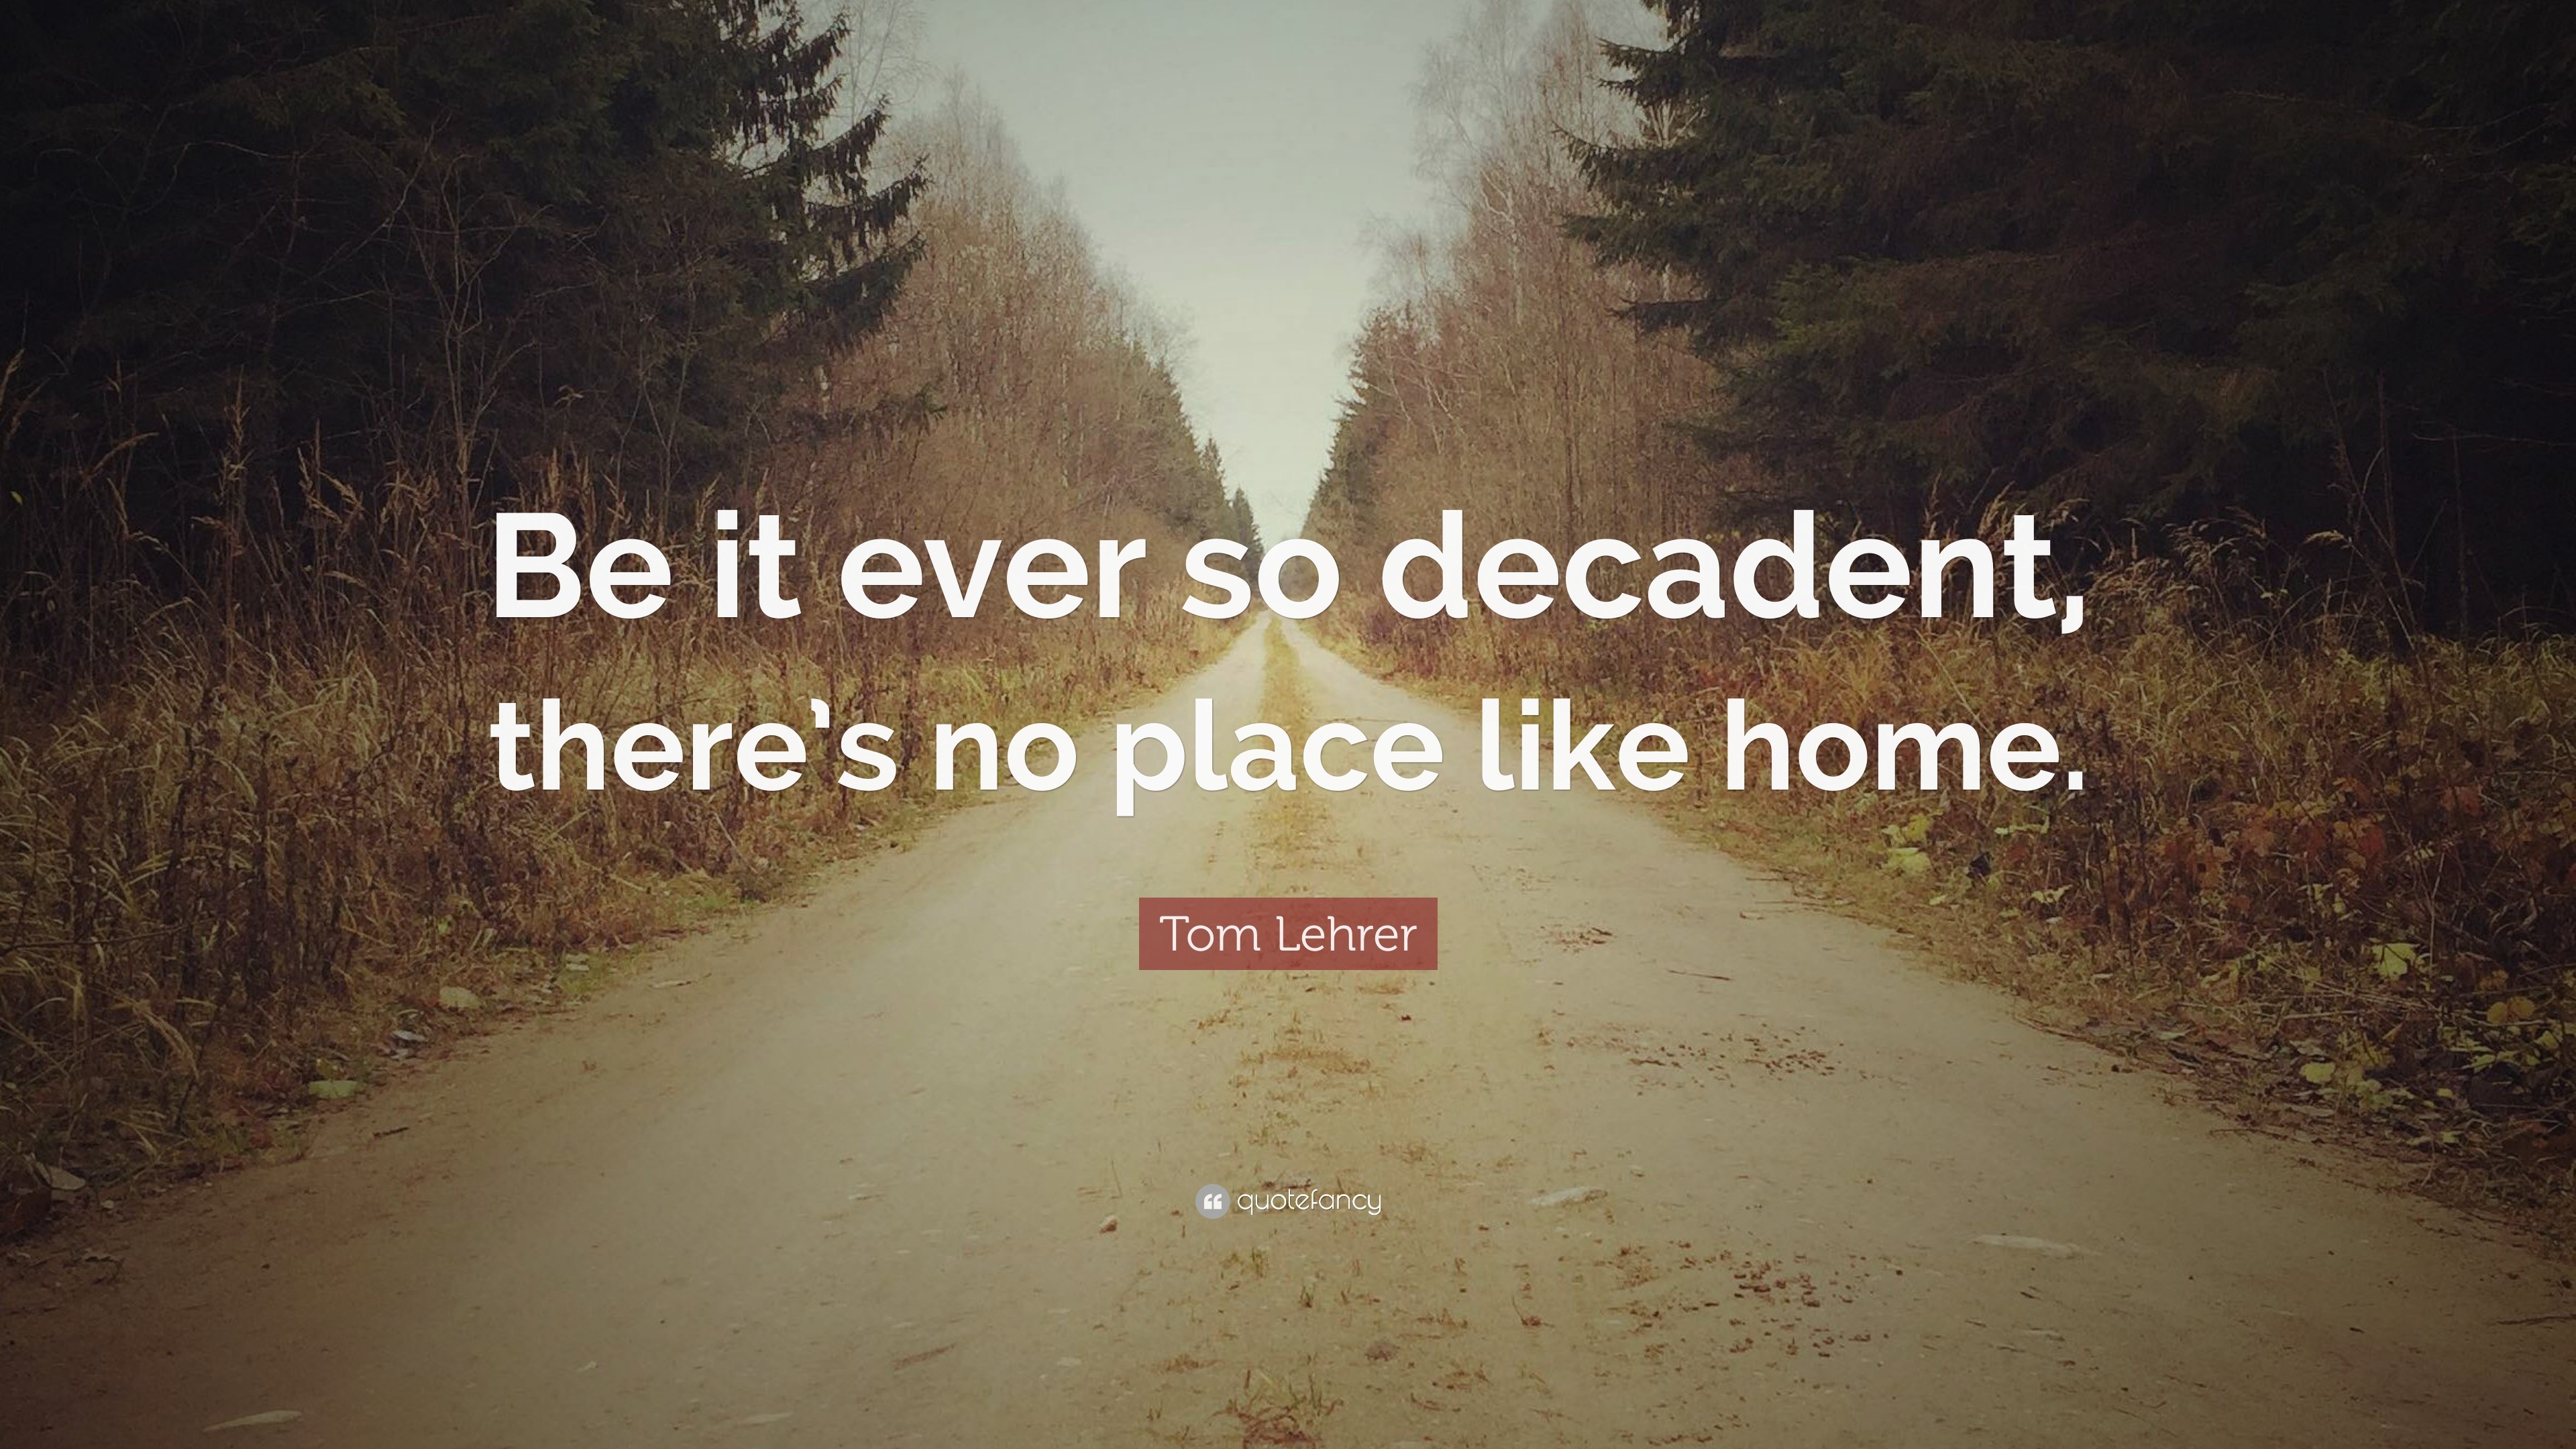 there's no place like home quote